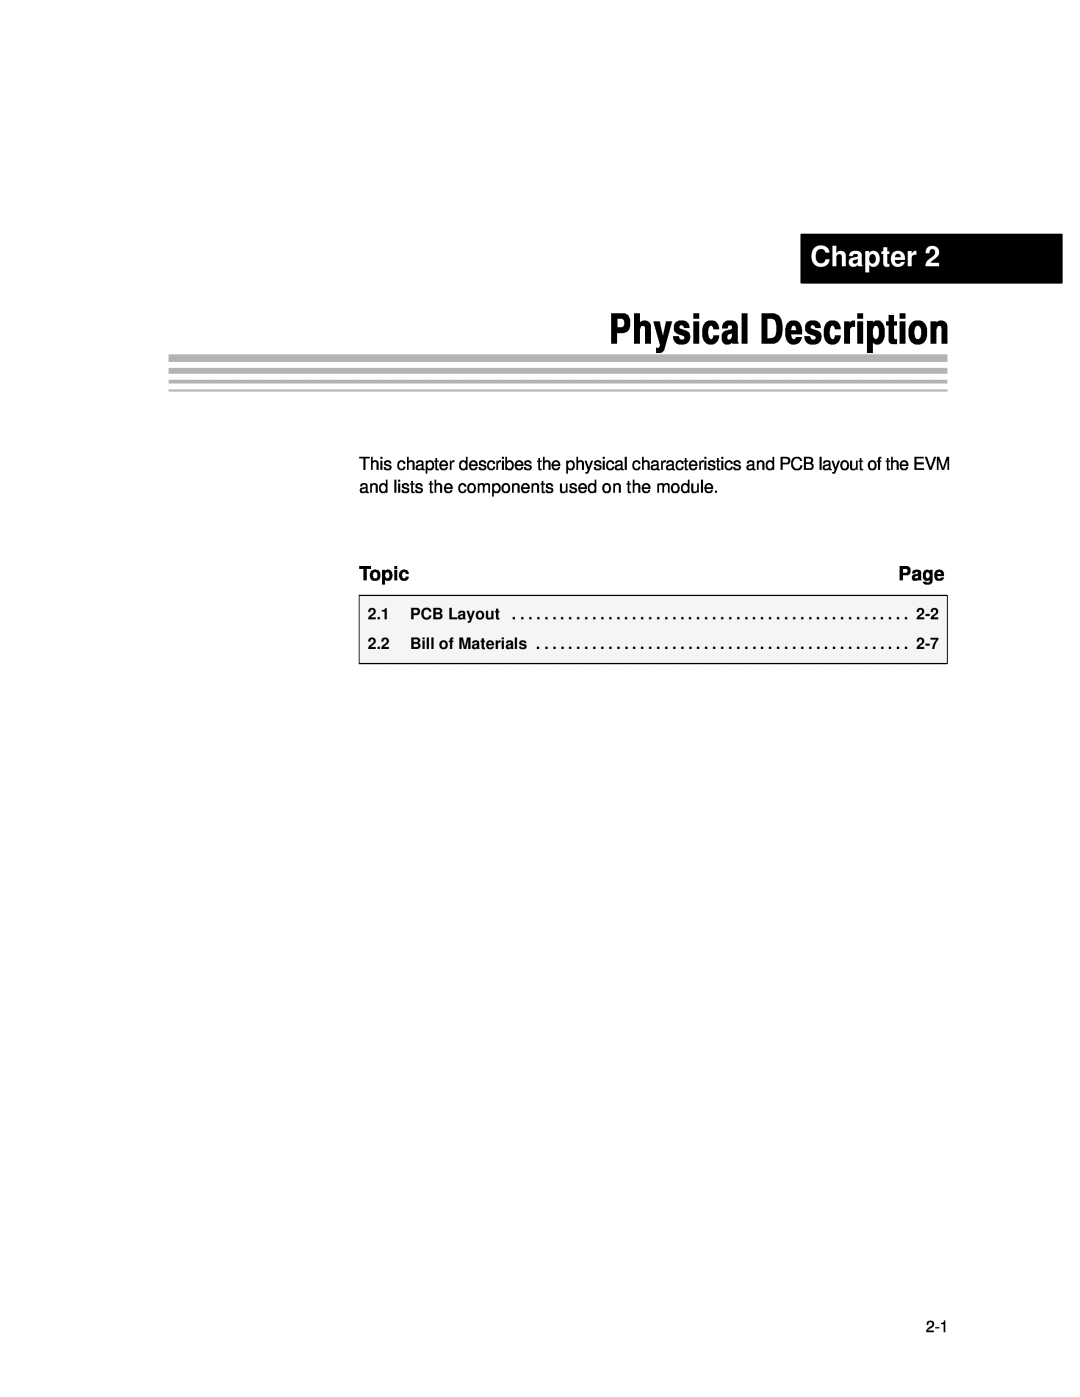 Texas Instruments DAC7741EVM manual Physical Description, Chapter, Page, Topic, PCB Layout, Bill of Materials 